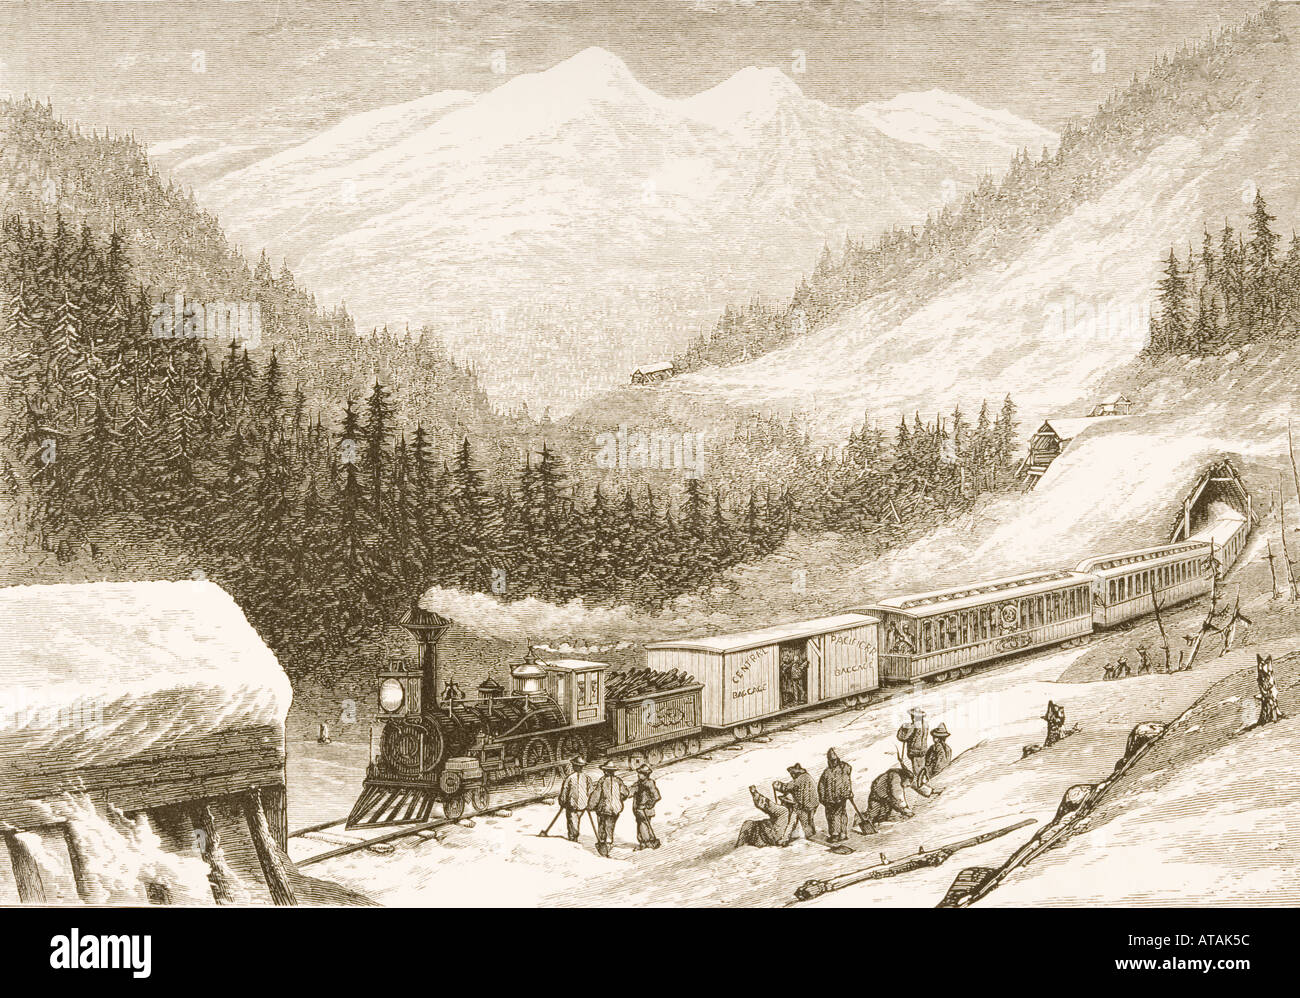 Steam train carrying US mail across Sierra Nevada in 1870's. Stock Photo